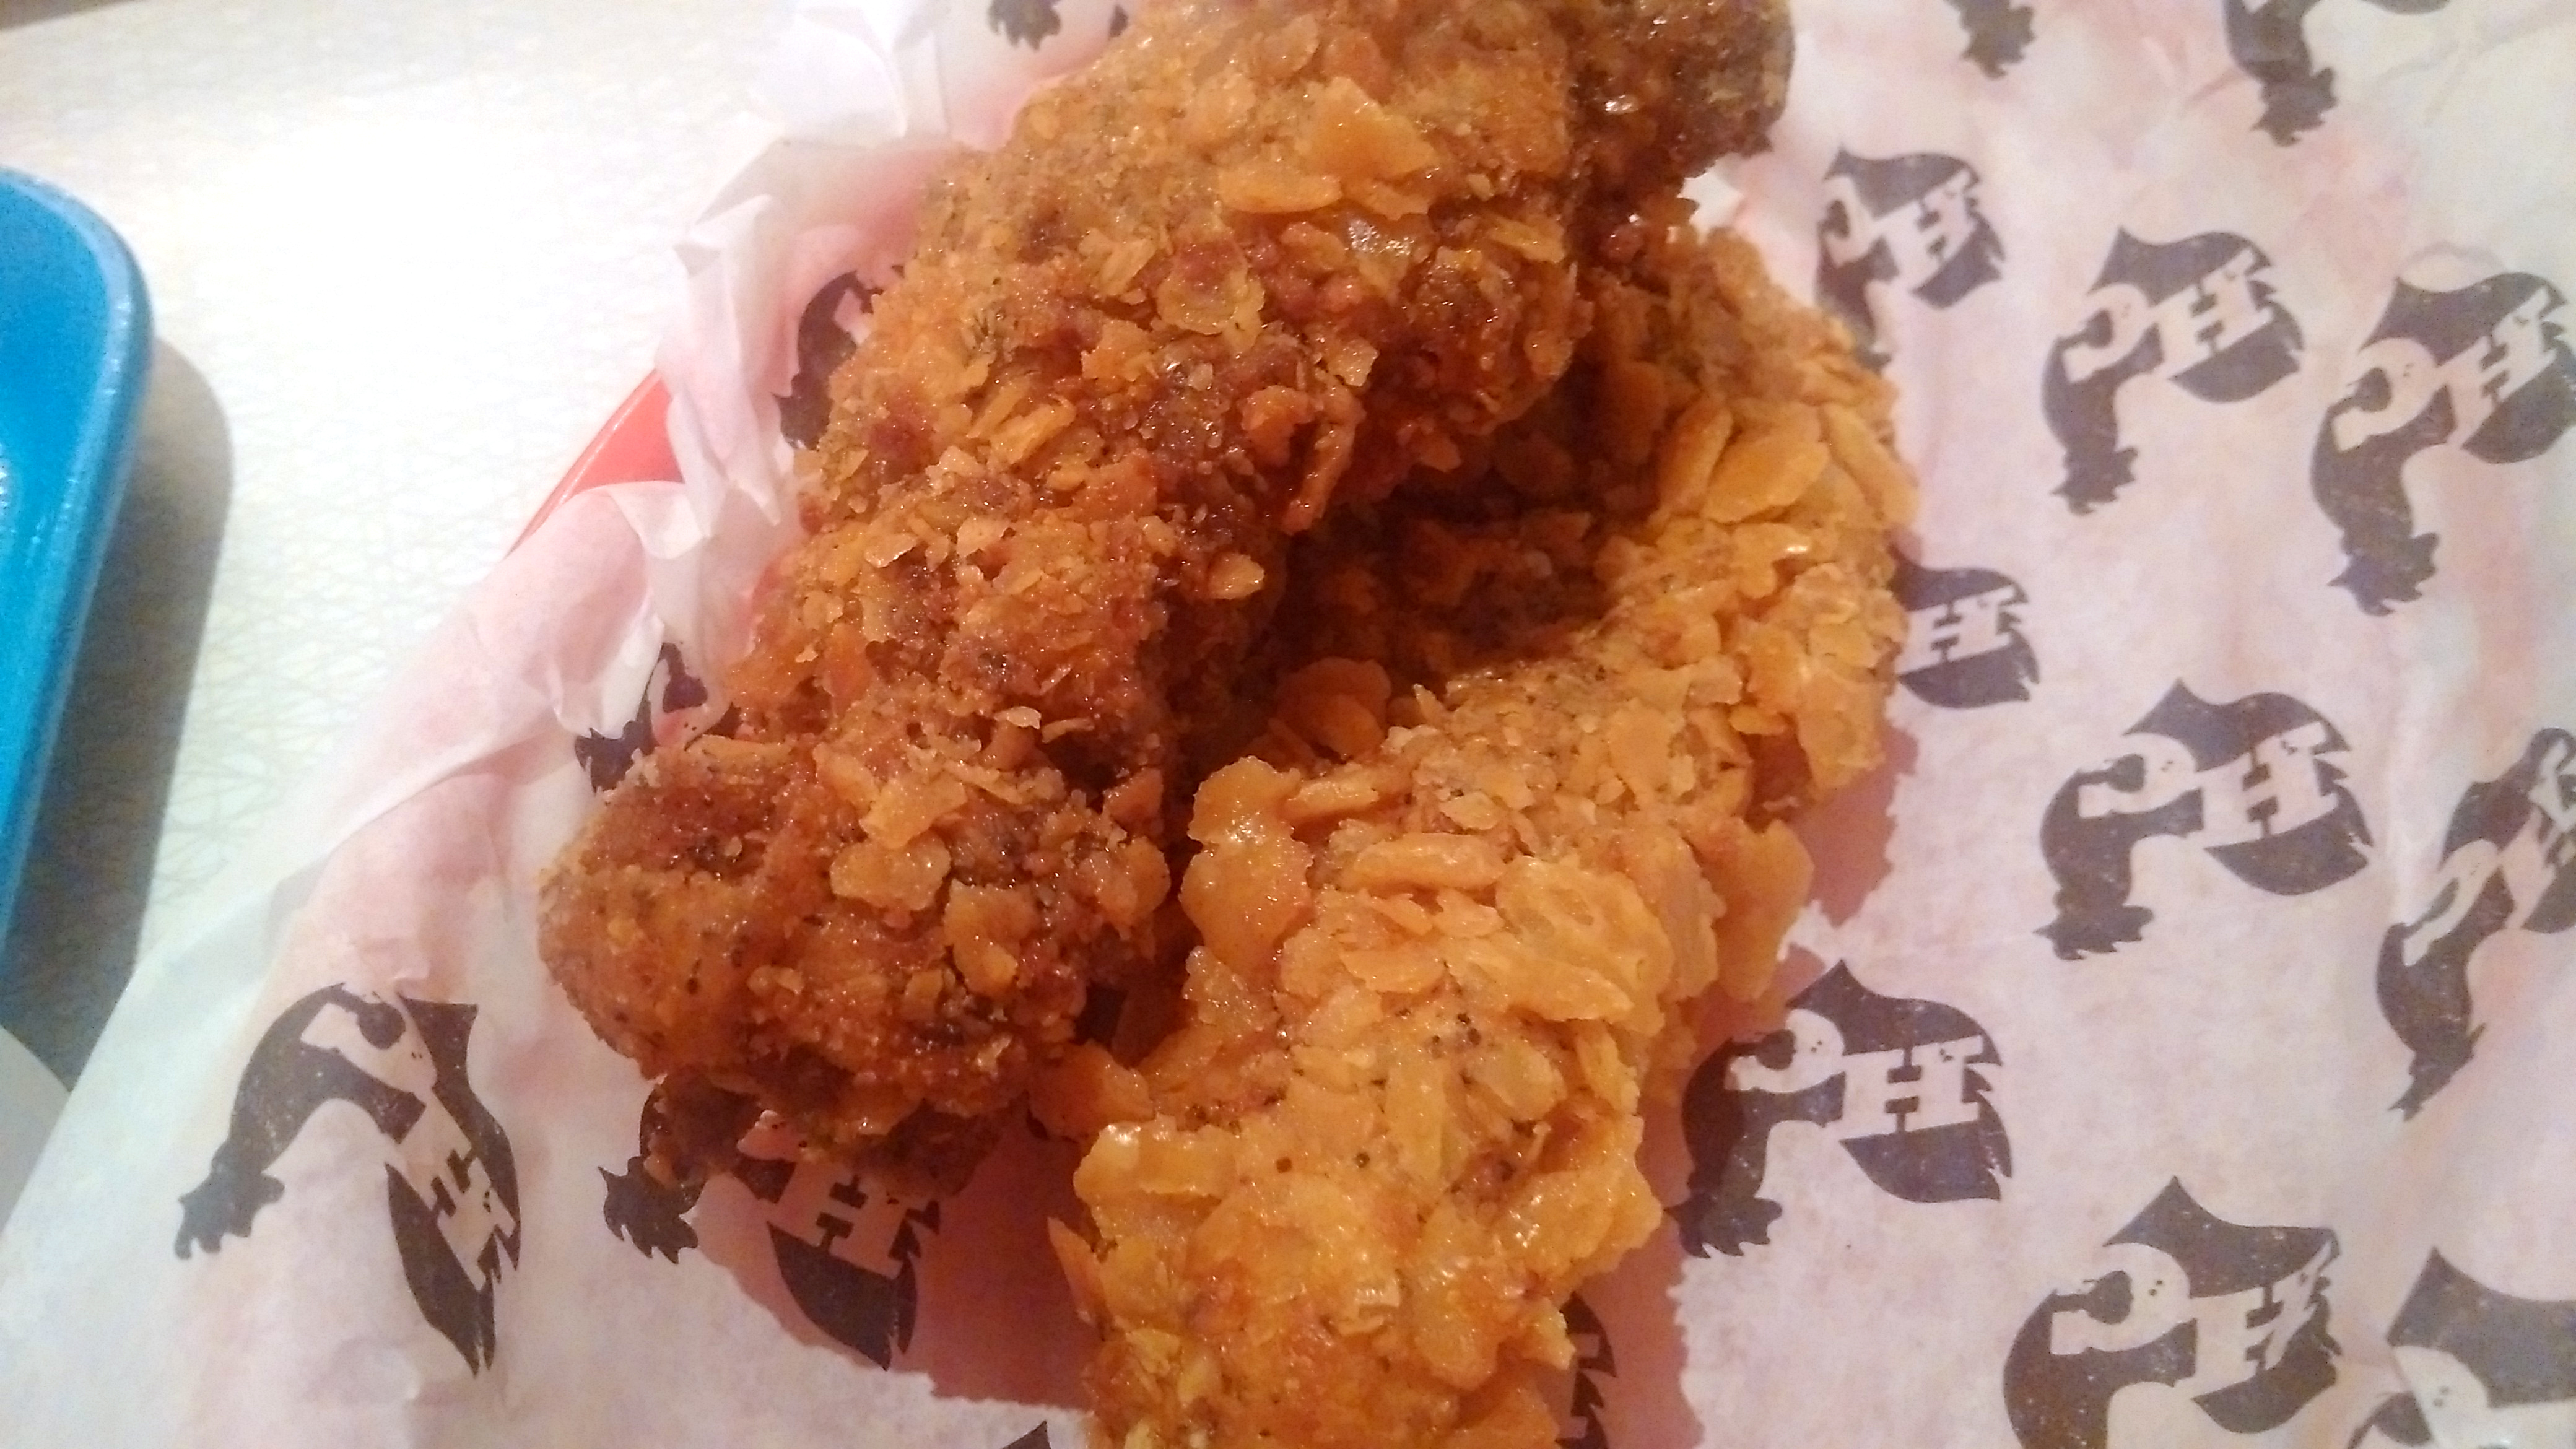 Hill Country fried chicken tenders